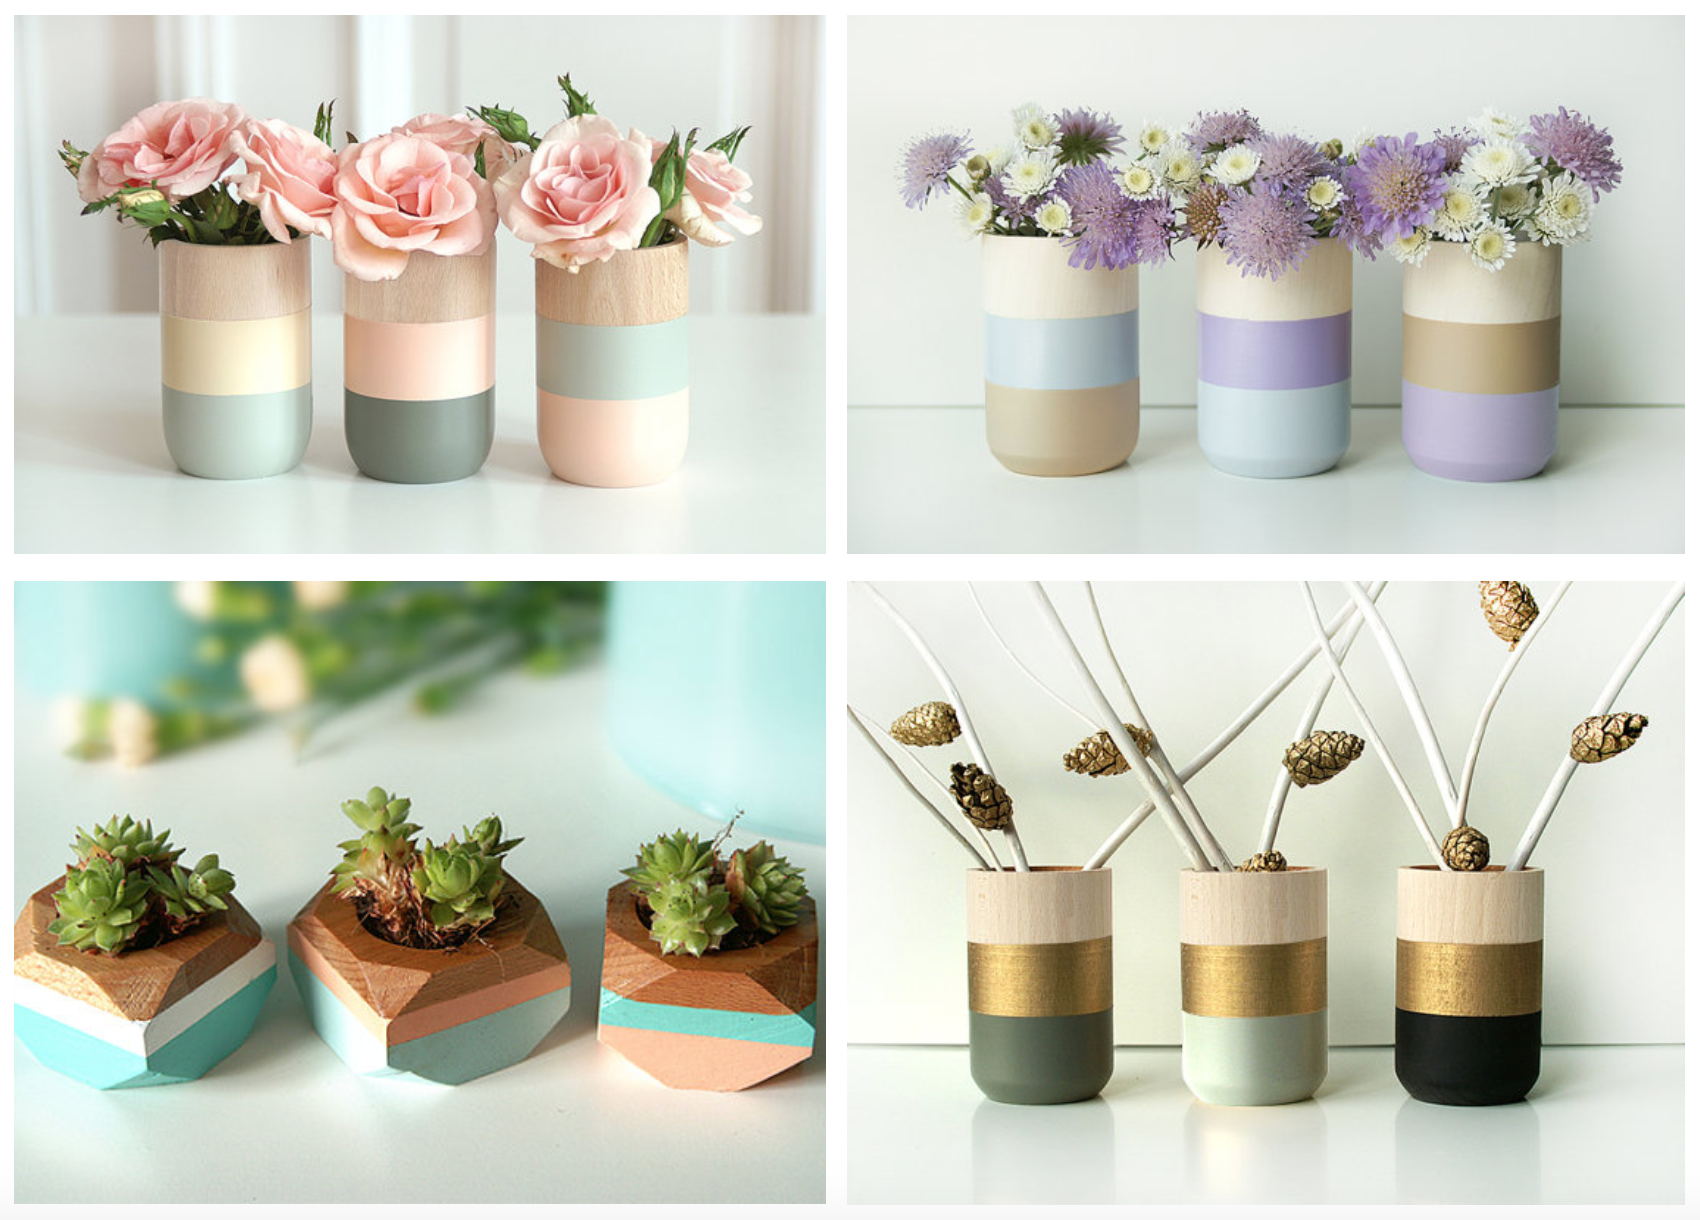 shade on shape handprinted wood vases and planters on easy